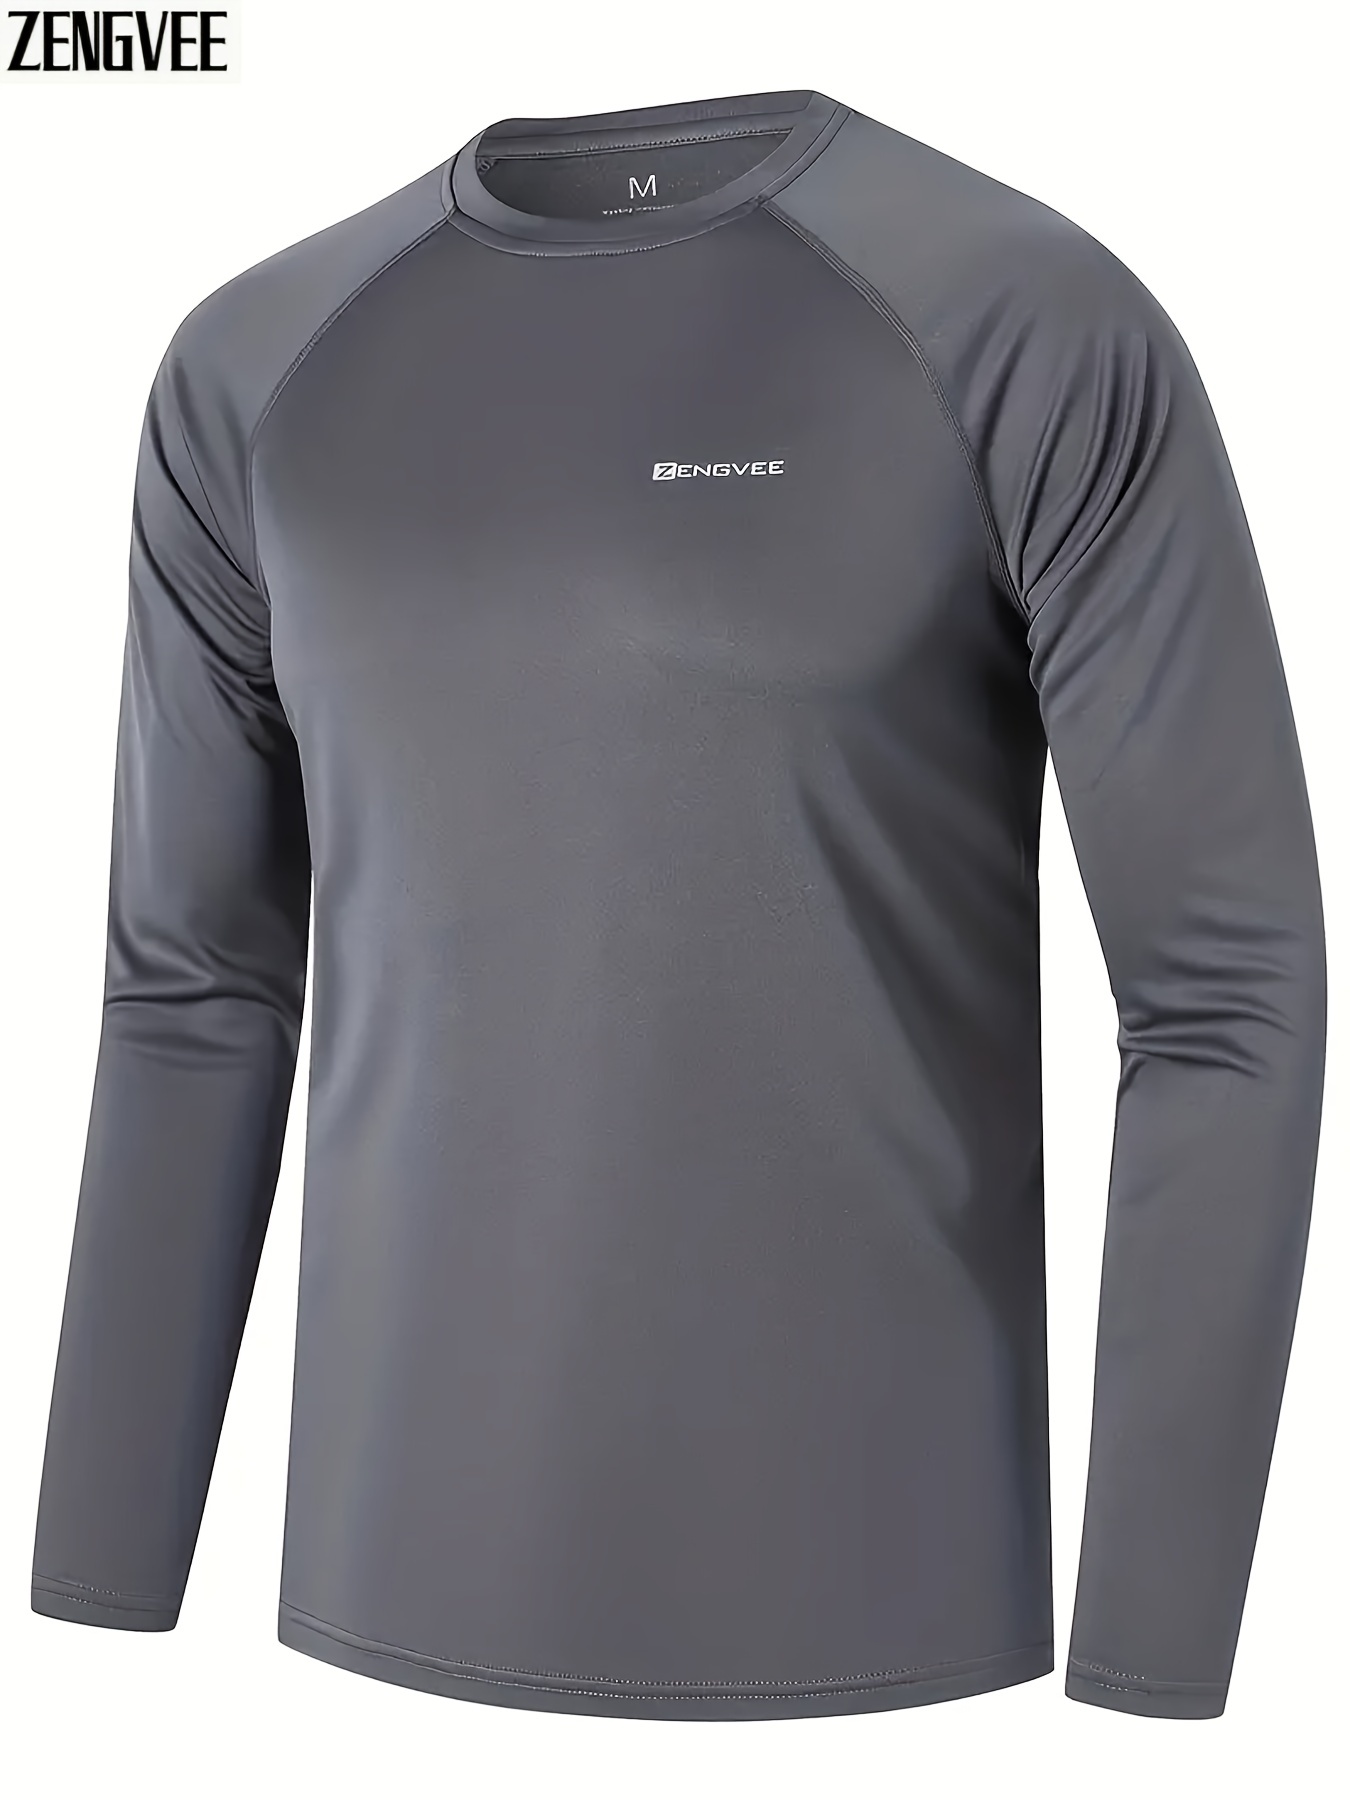 Mens Rash Guard Shirts: Assorted Colors, Sun Protection For Outdoor Athletic Workouts!